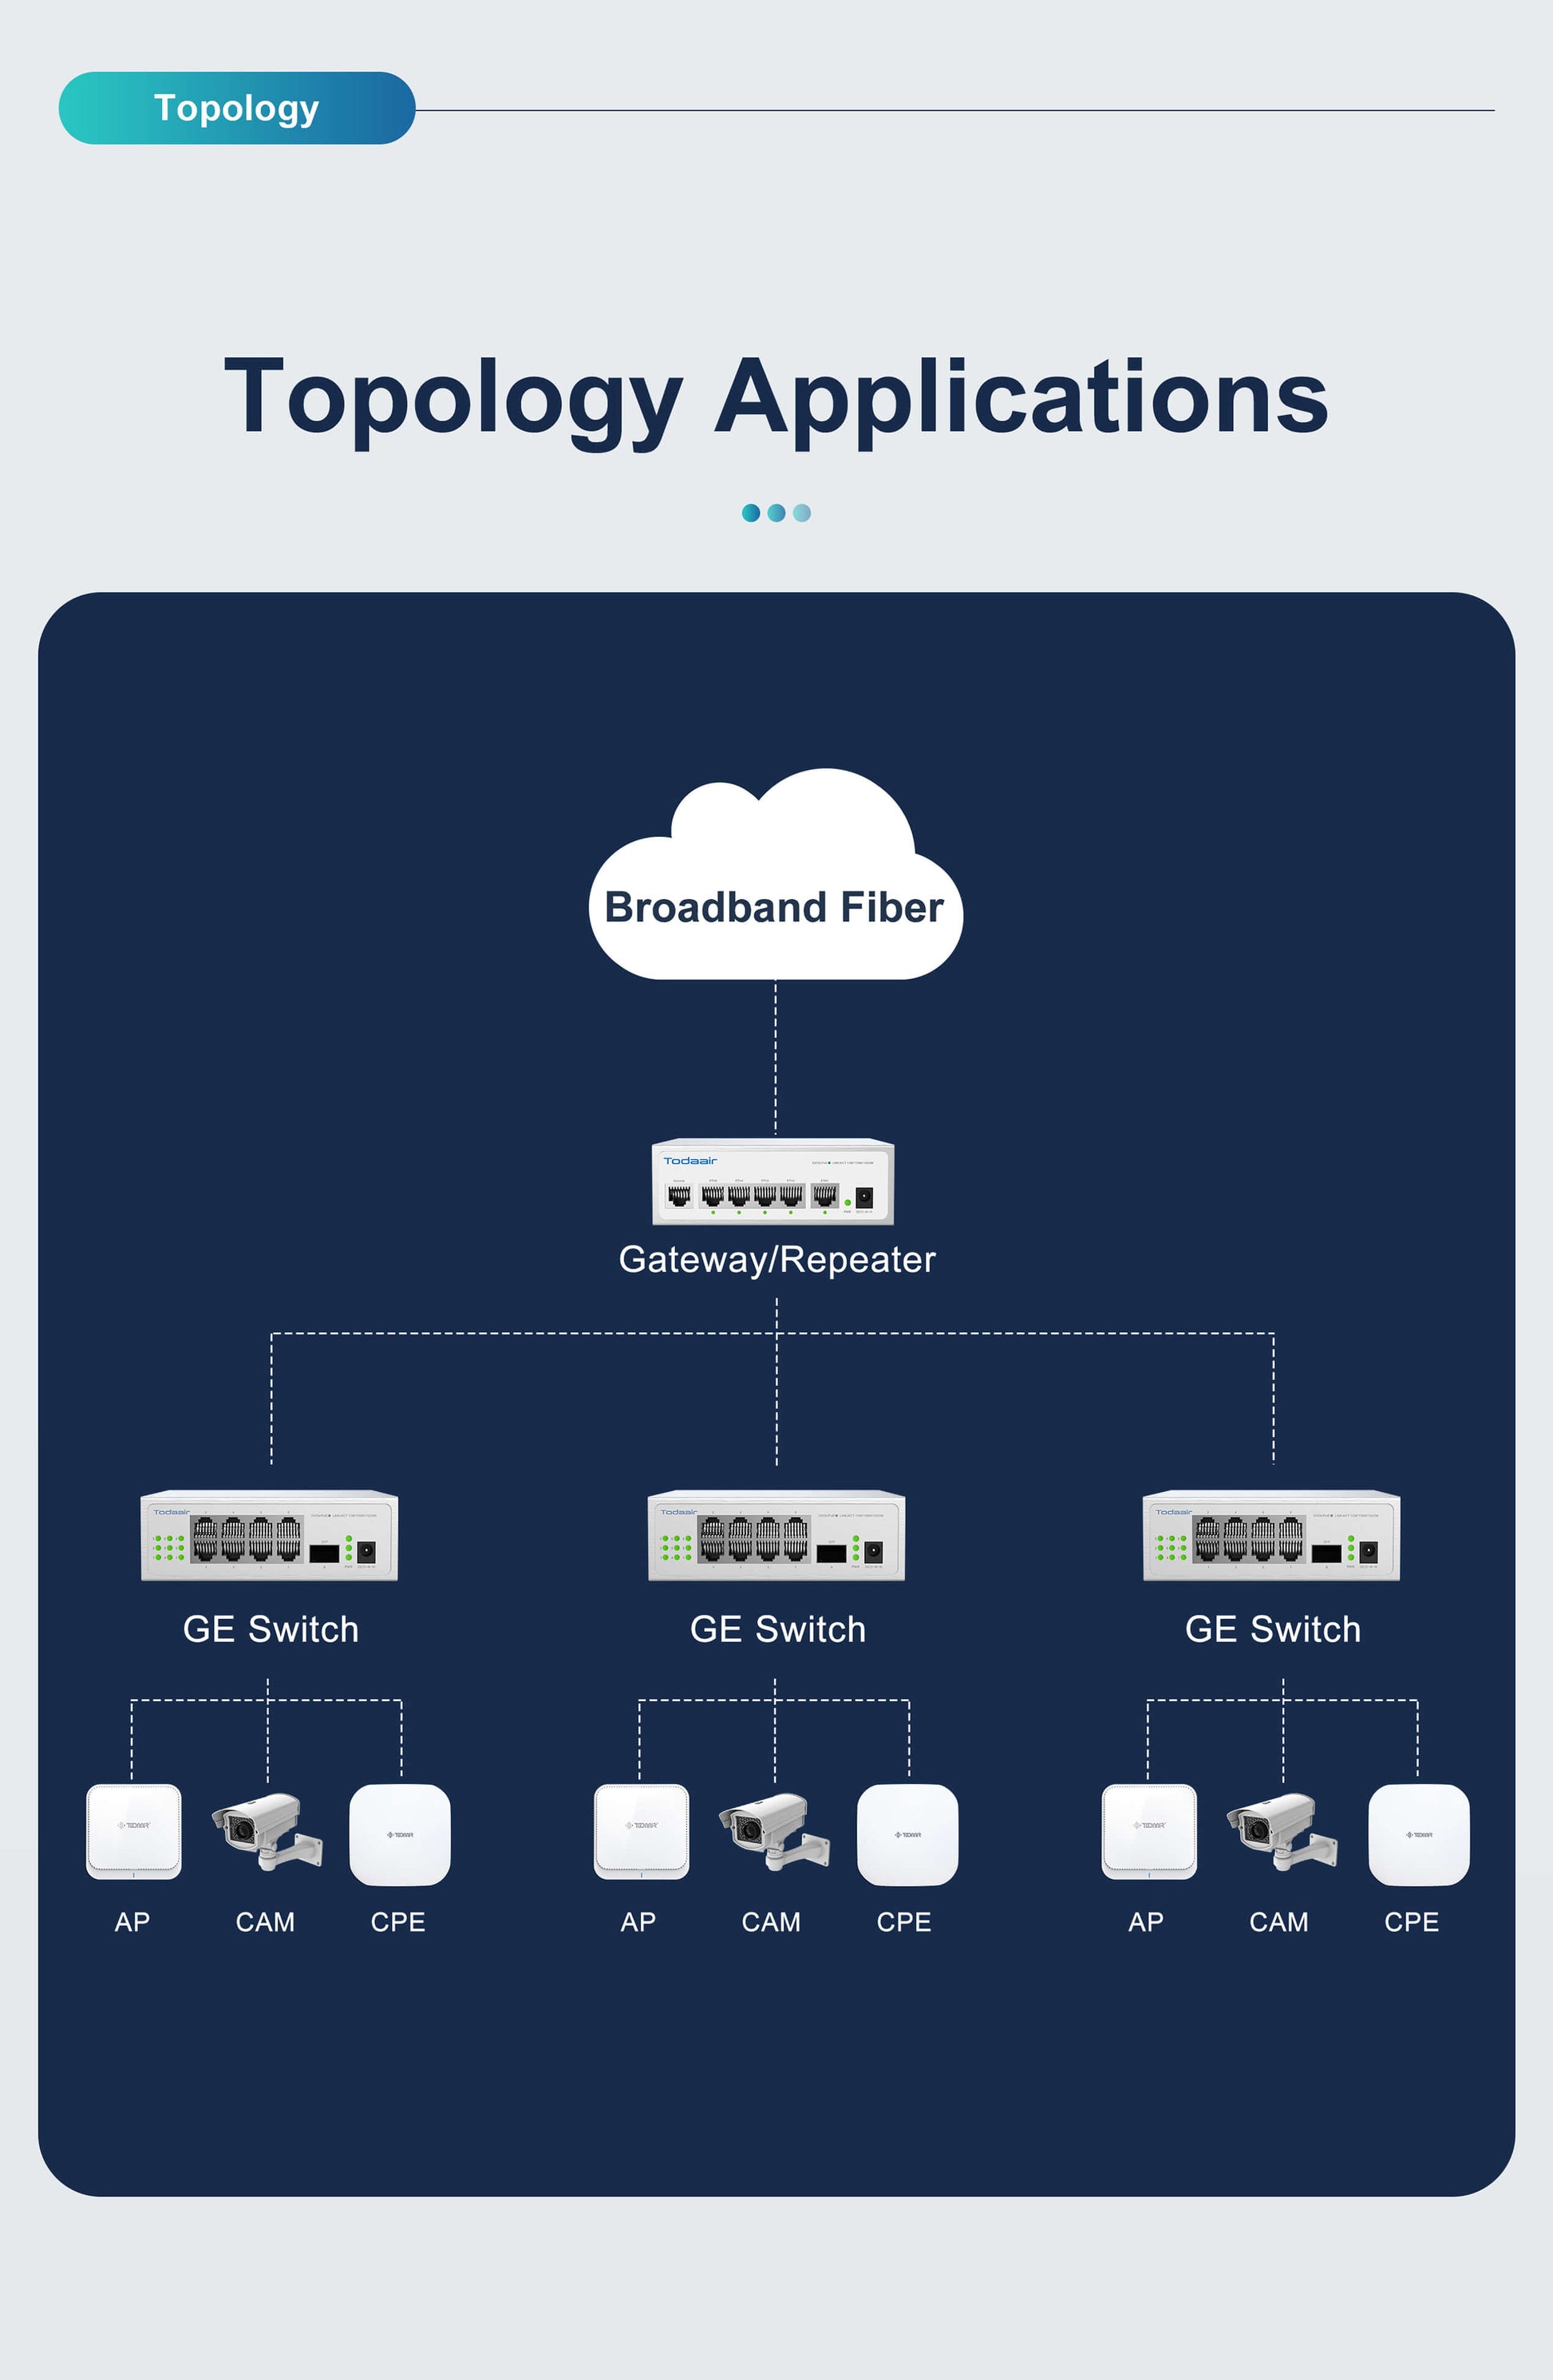 POE network switch topology application